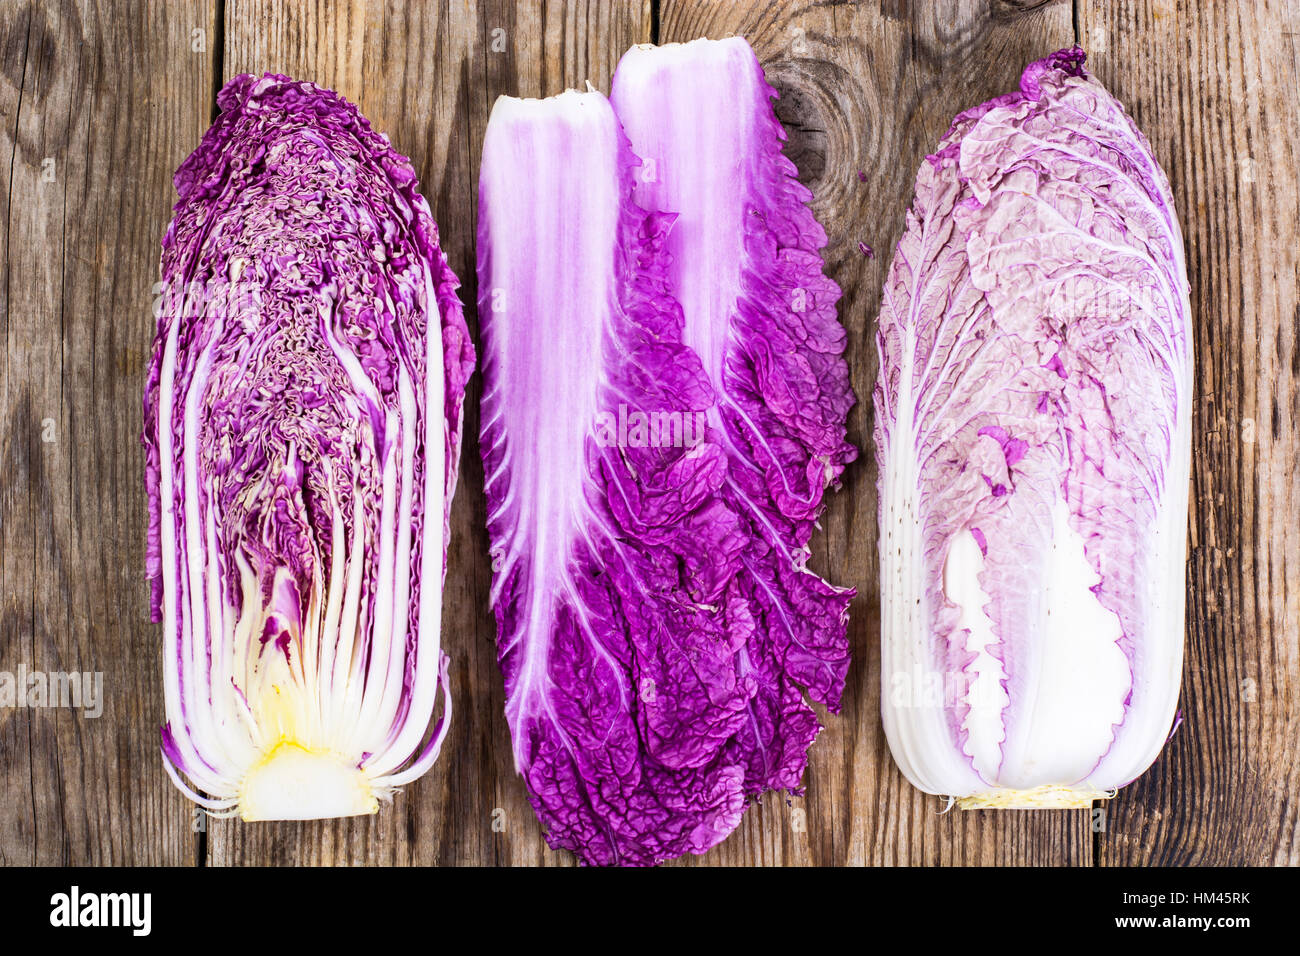 Cut red bok choy on a wooden background Stock Photo - Alamy